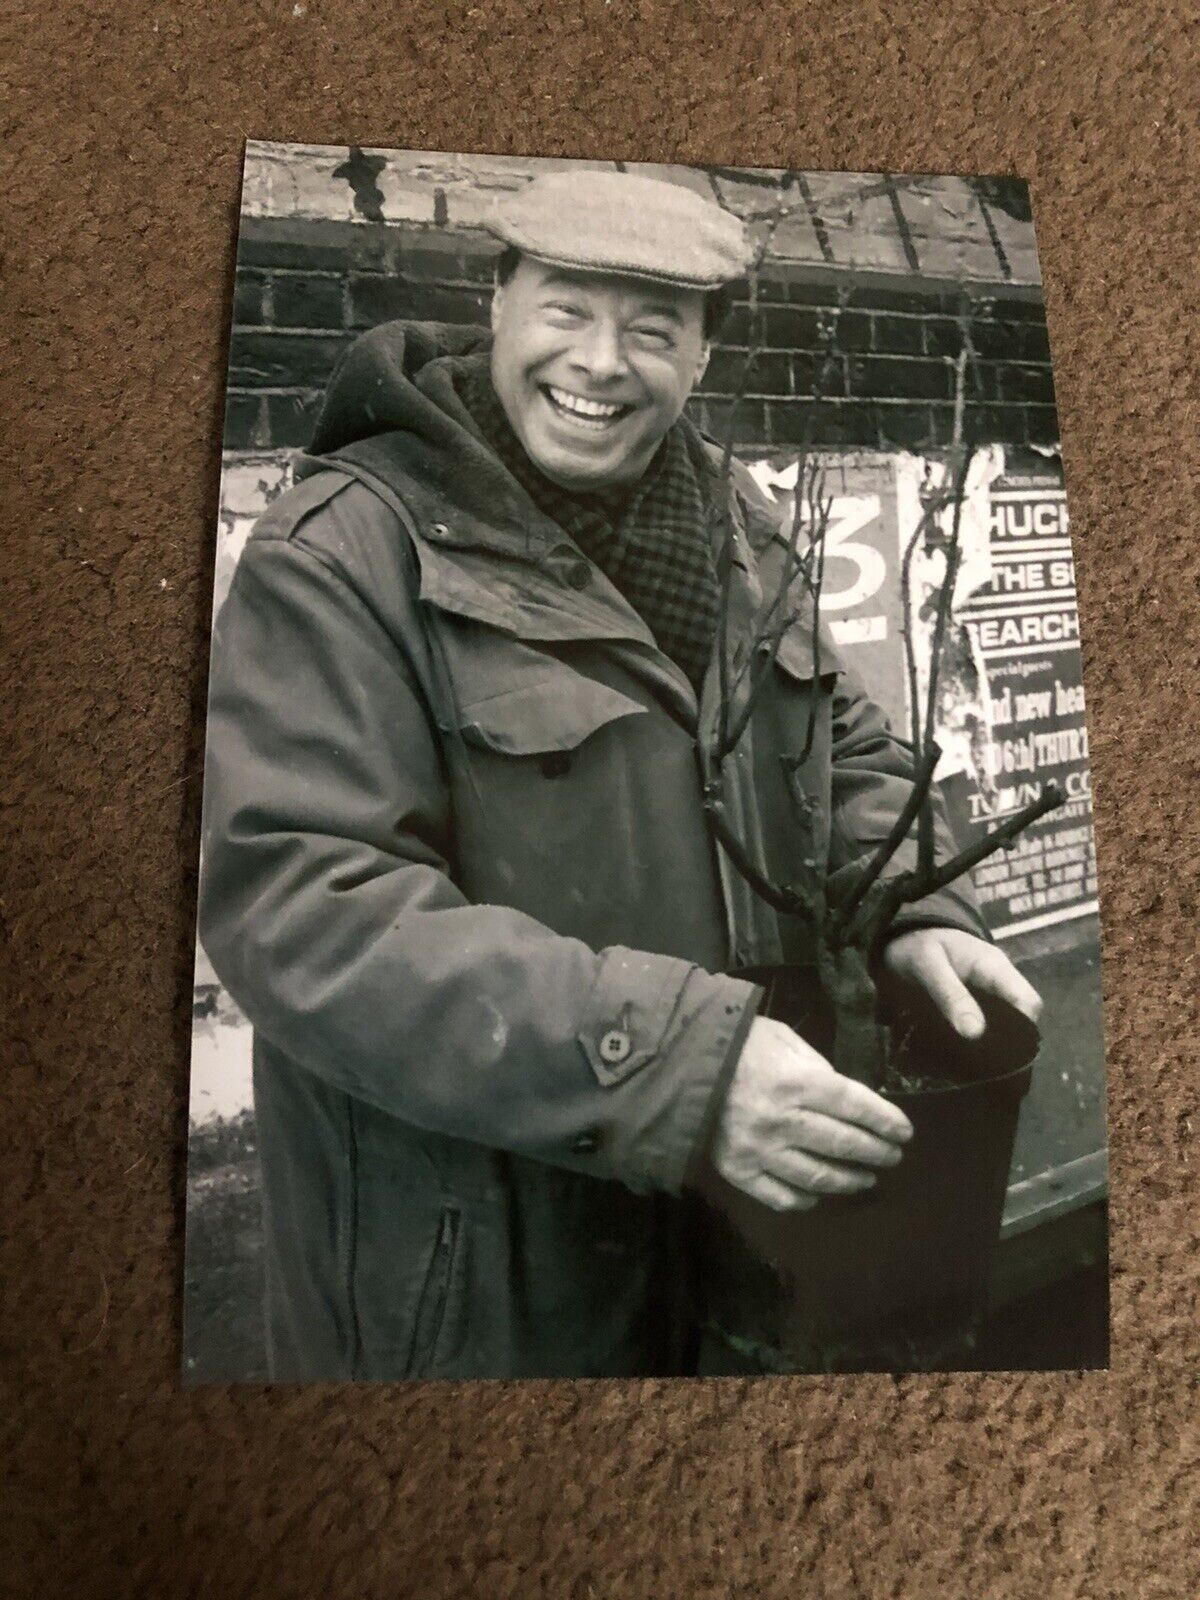 BILL TREACHER (EASTENDERS) UNSIGNED Photo Poster painting- 6x4”